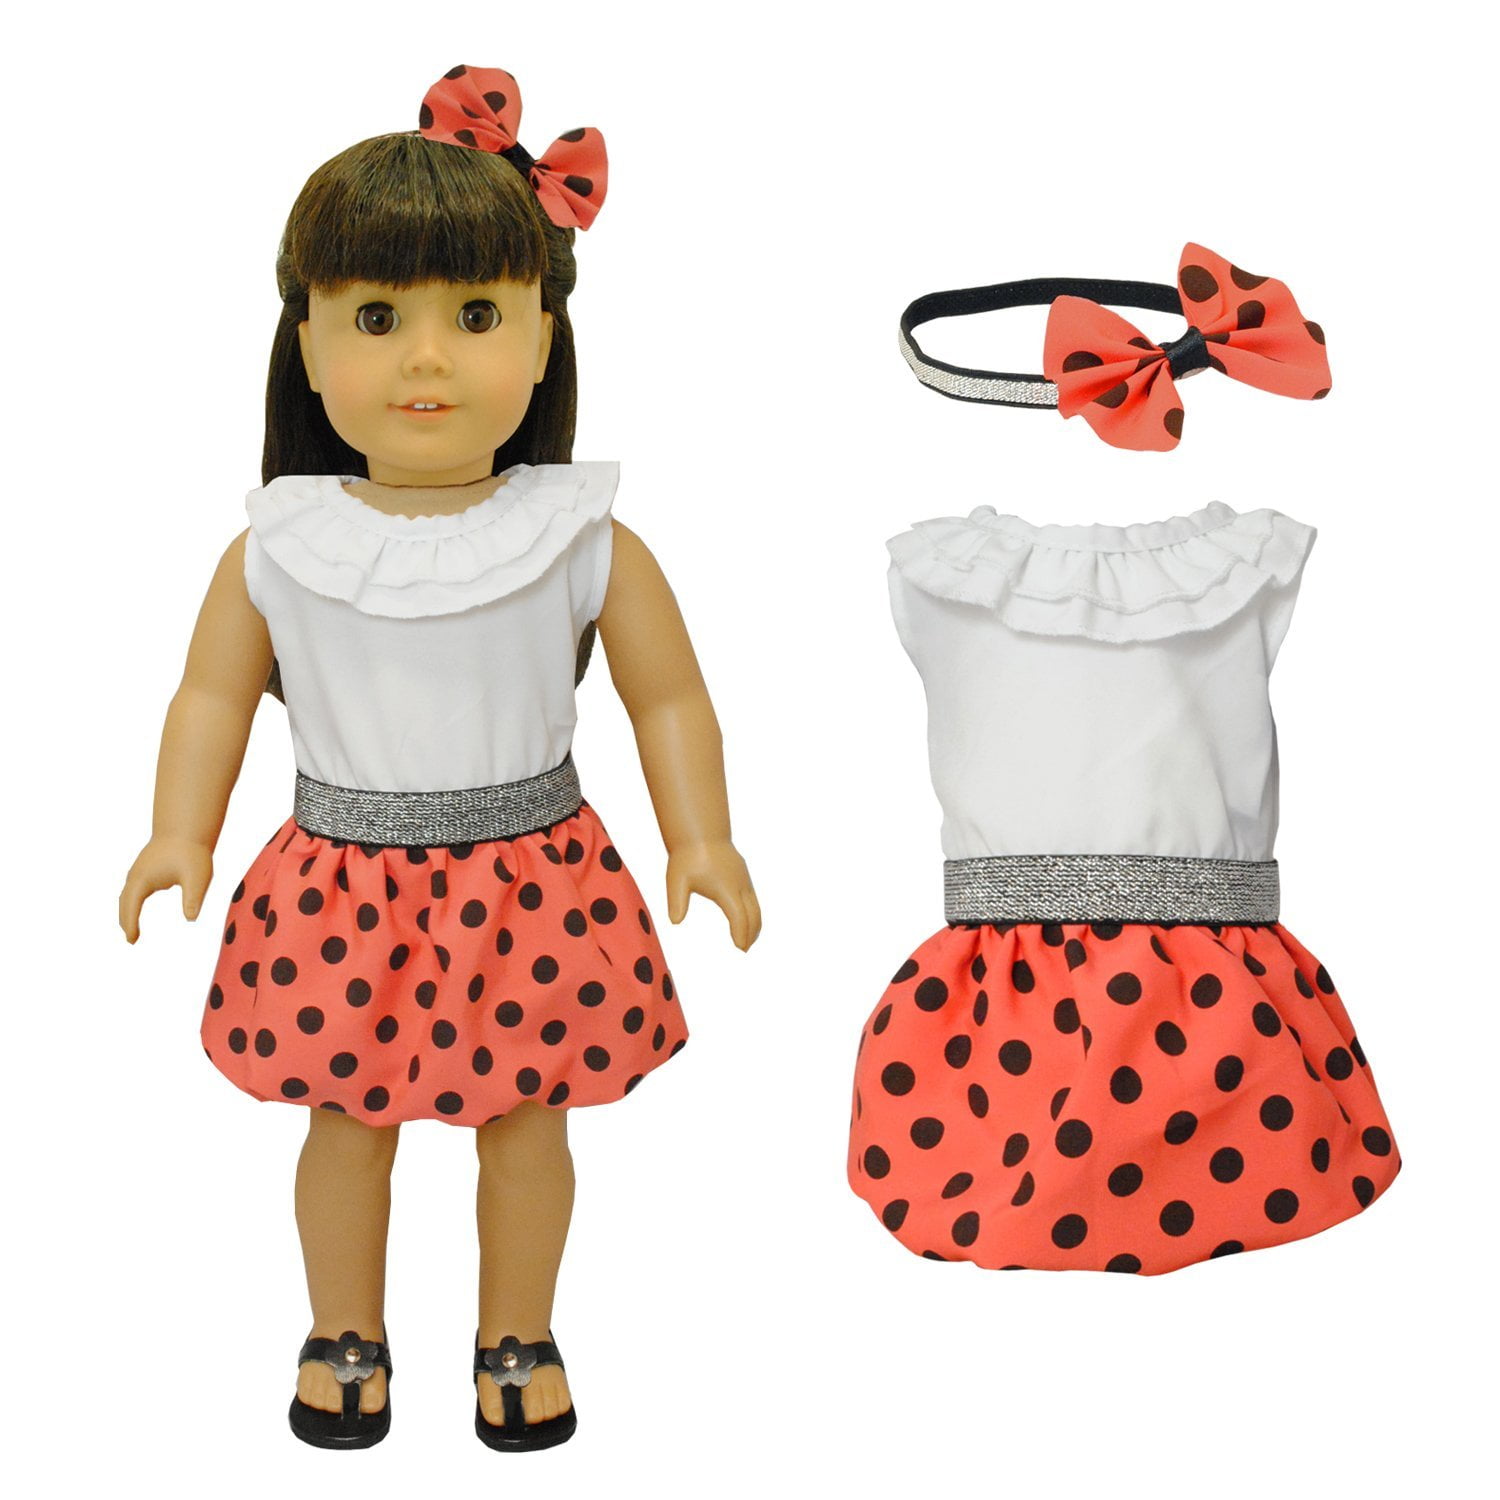 18" doll clothes-fits American Girl Generation My Life-Dress-Chevron w/Dots